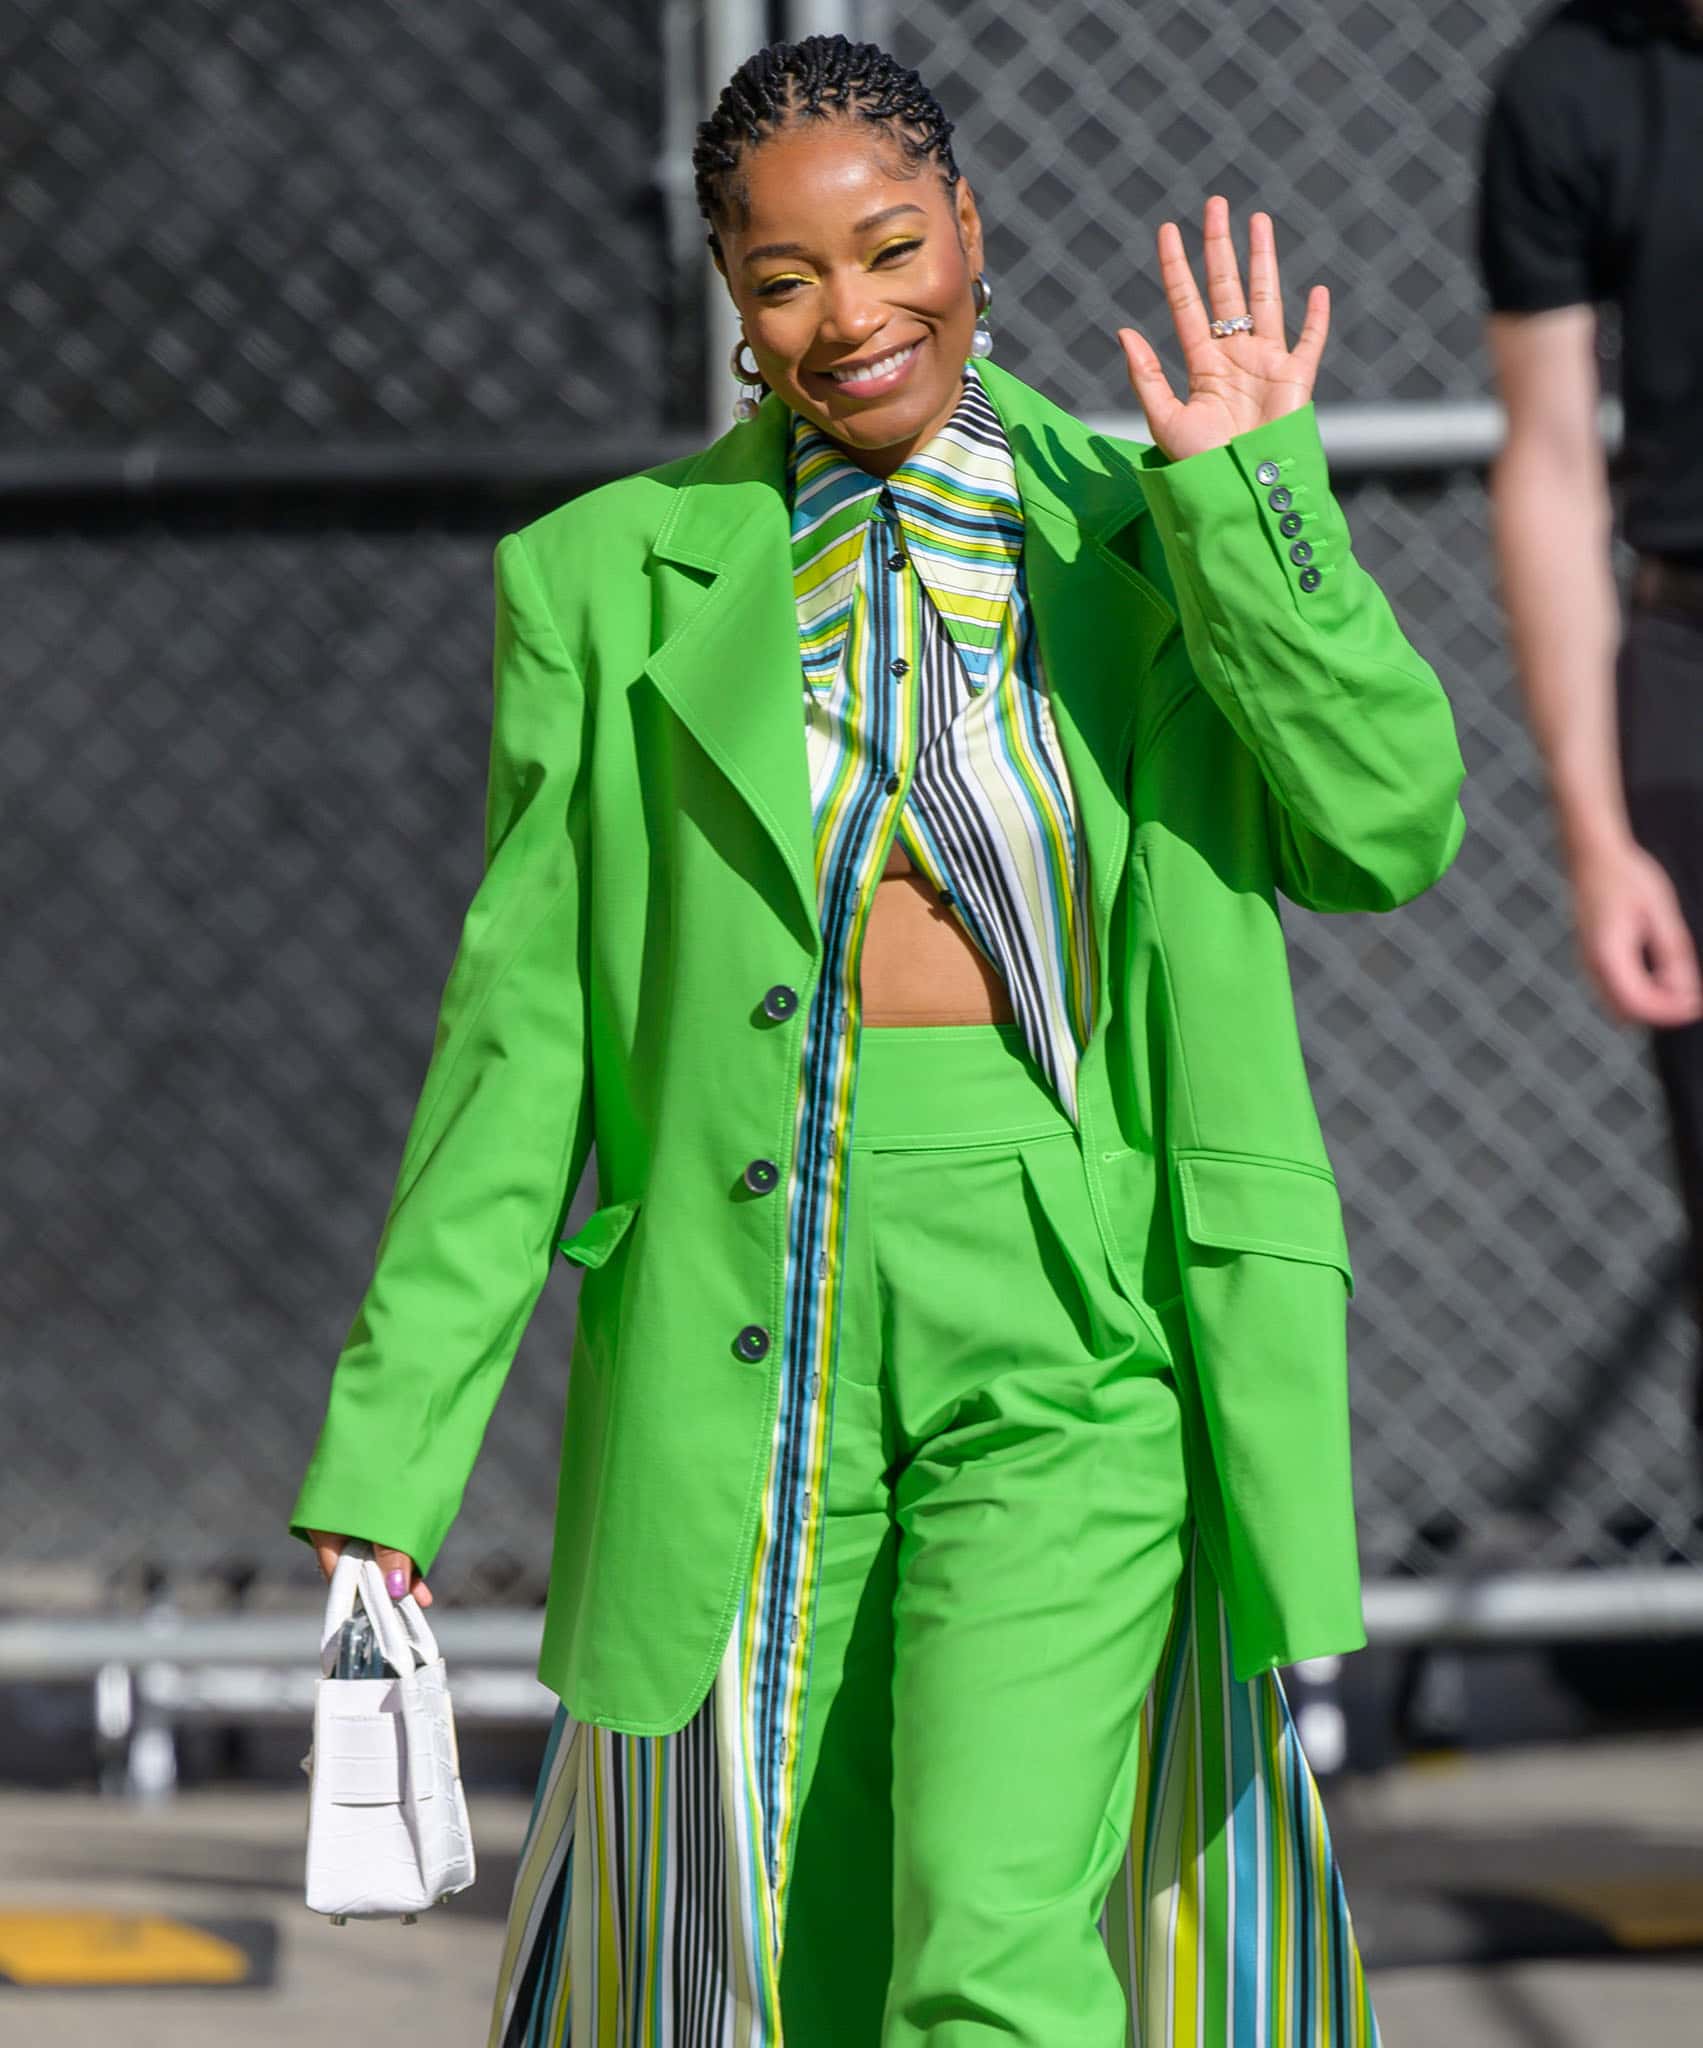 Keke Palmer styles her tresses into a tight dreadlock ponytail and wears coordinating green eyeshadow